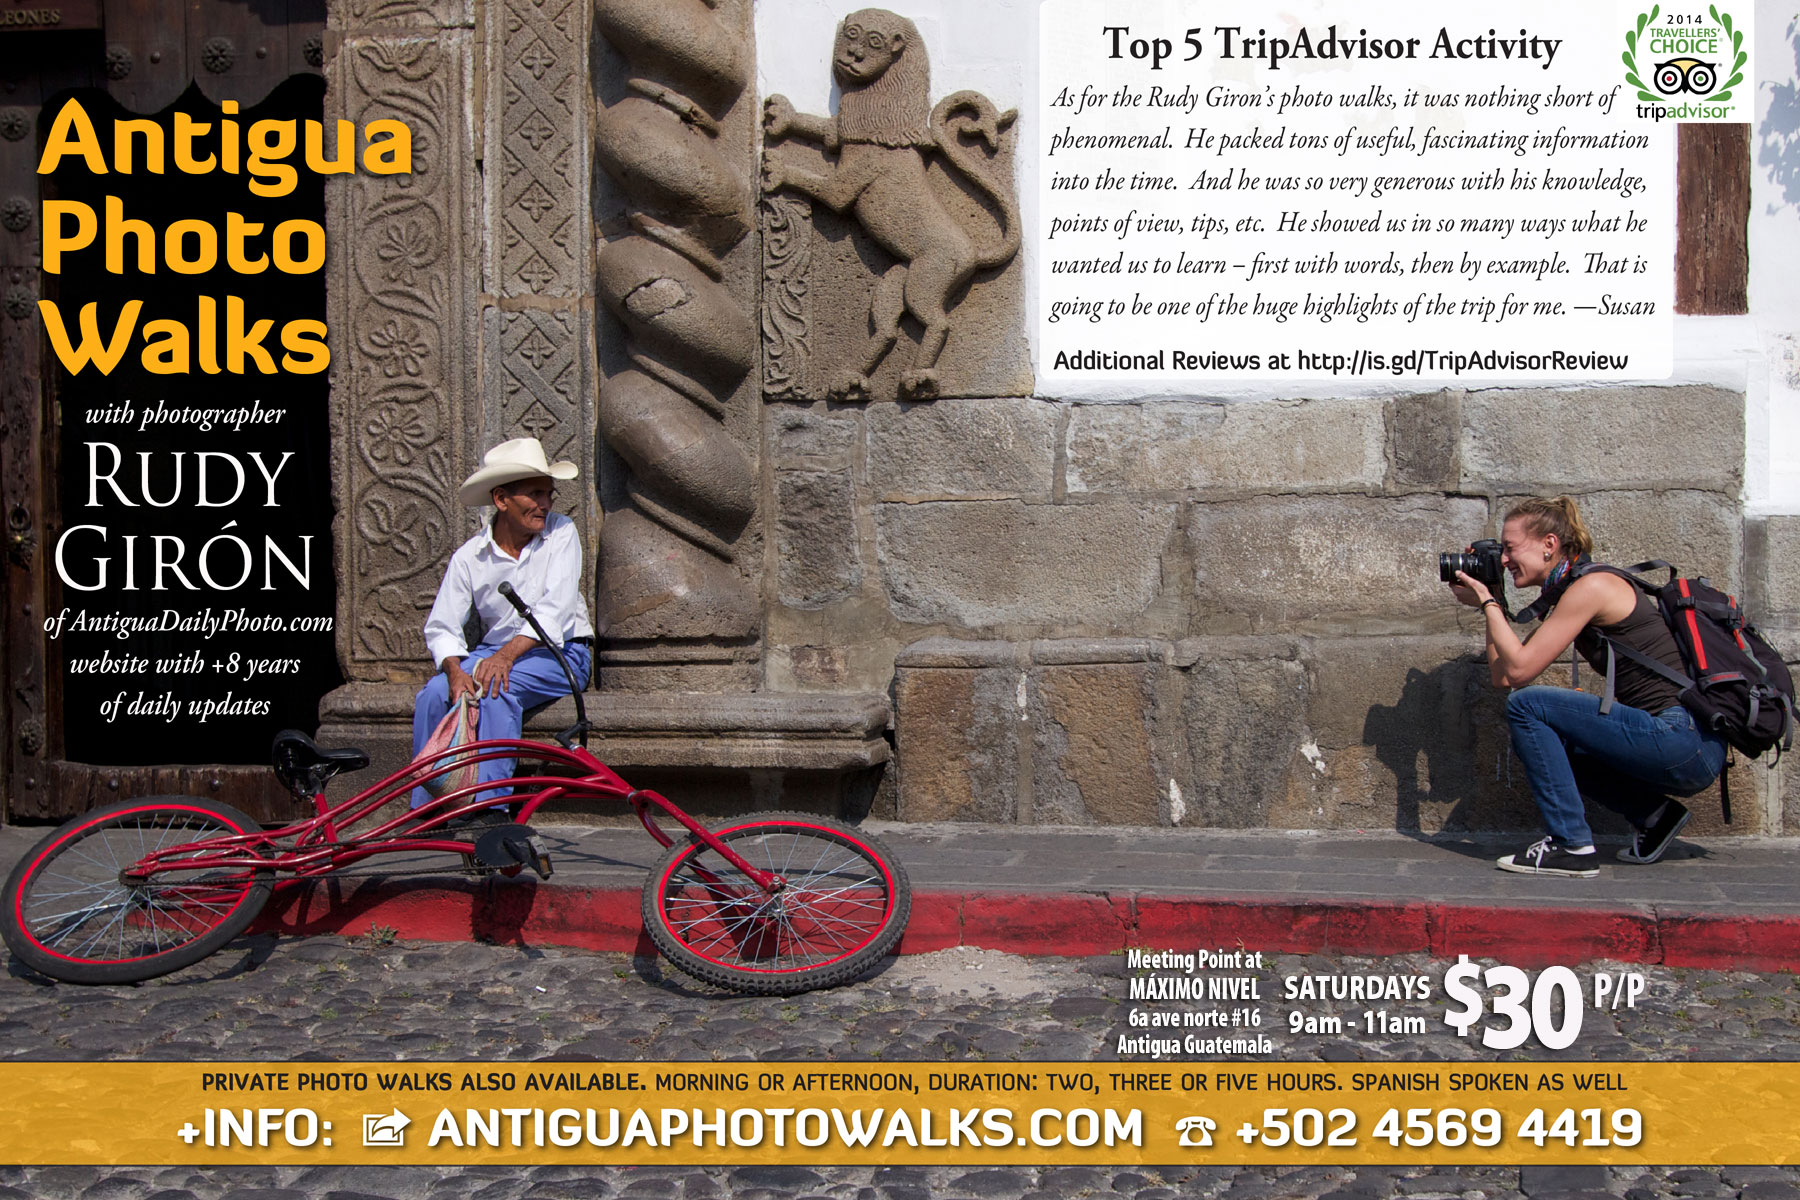 Sign Up today to attend a Public Antigua Photo Walk with with photographer Rudy Giron on Saturday Mornings